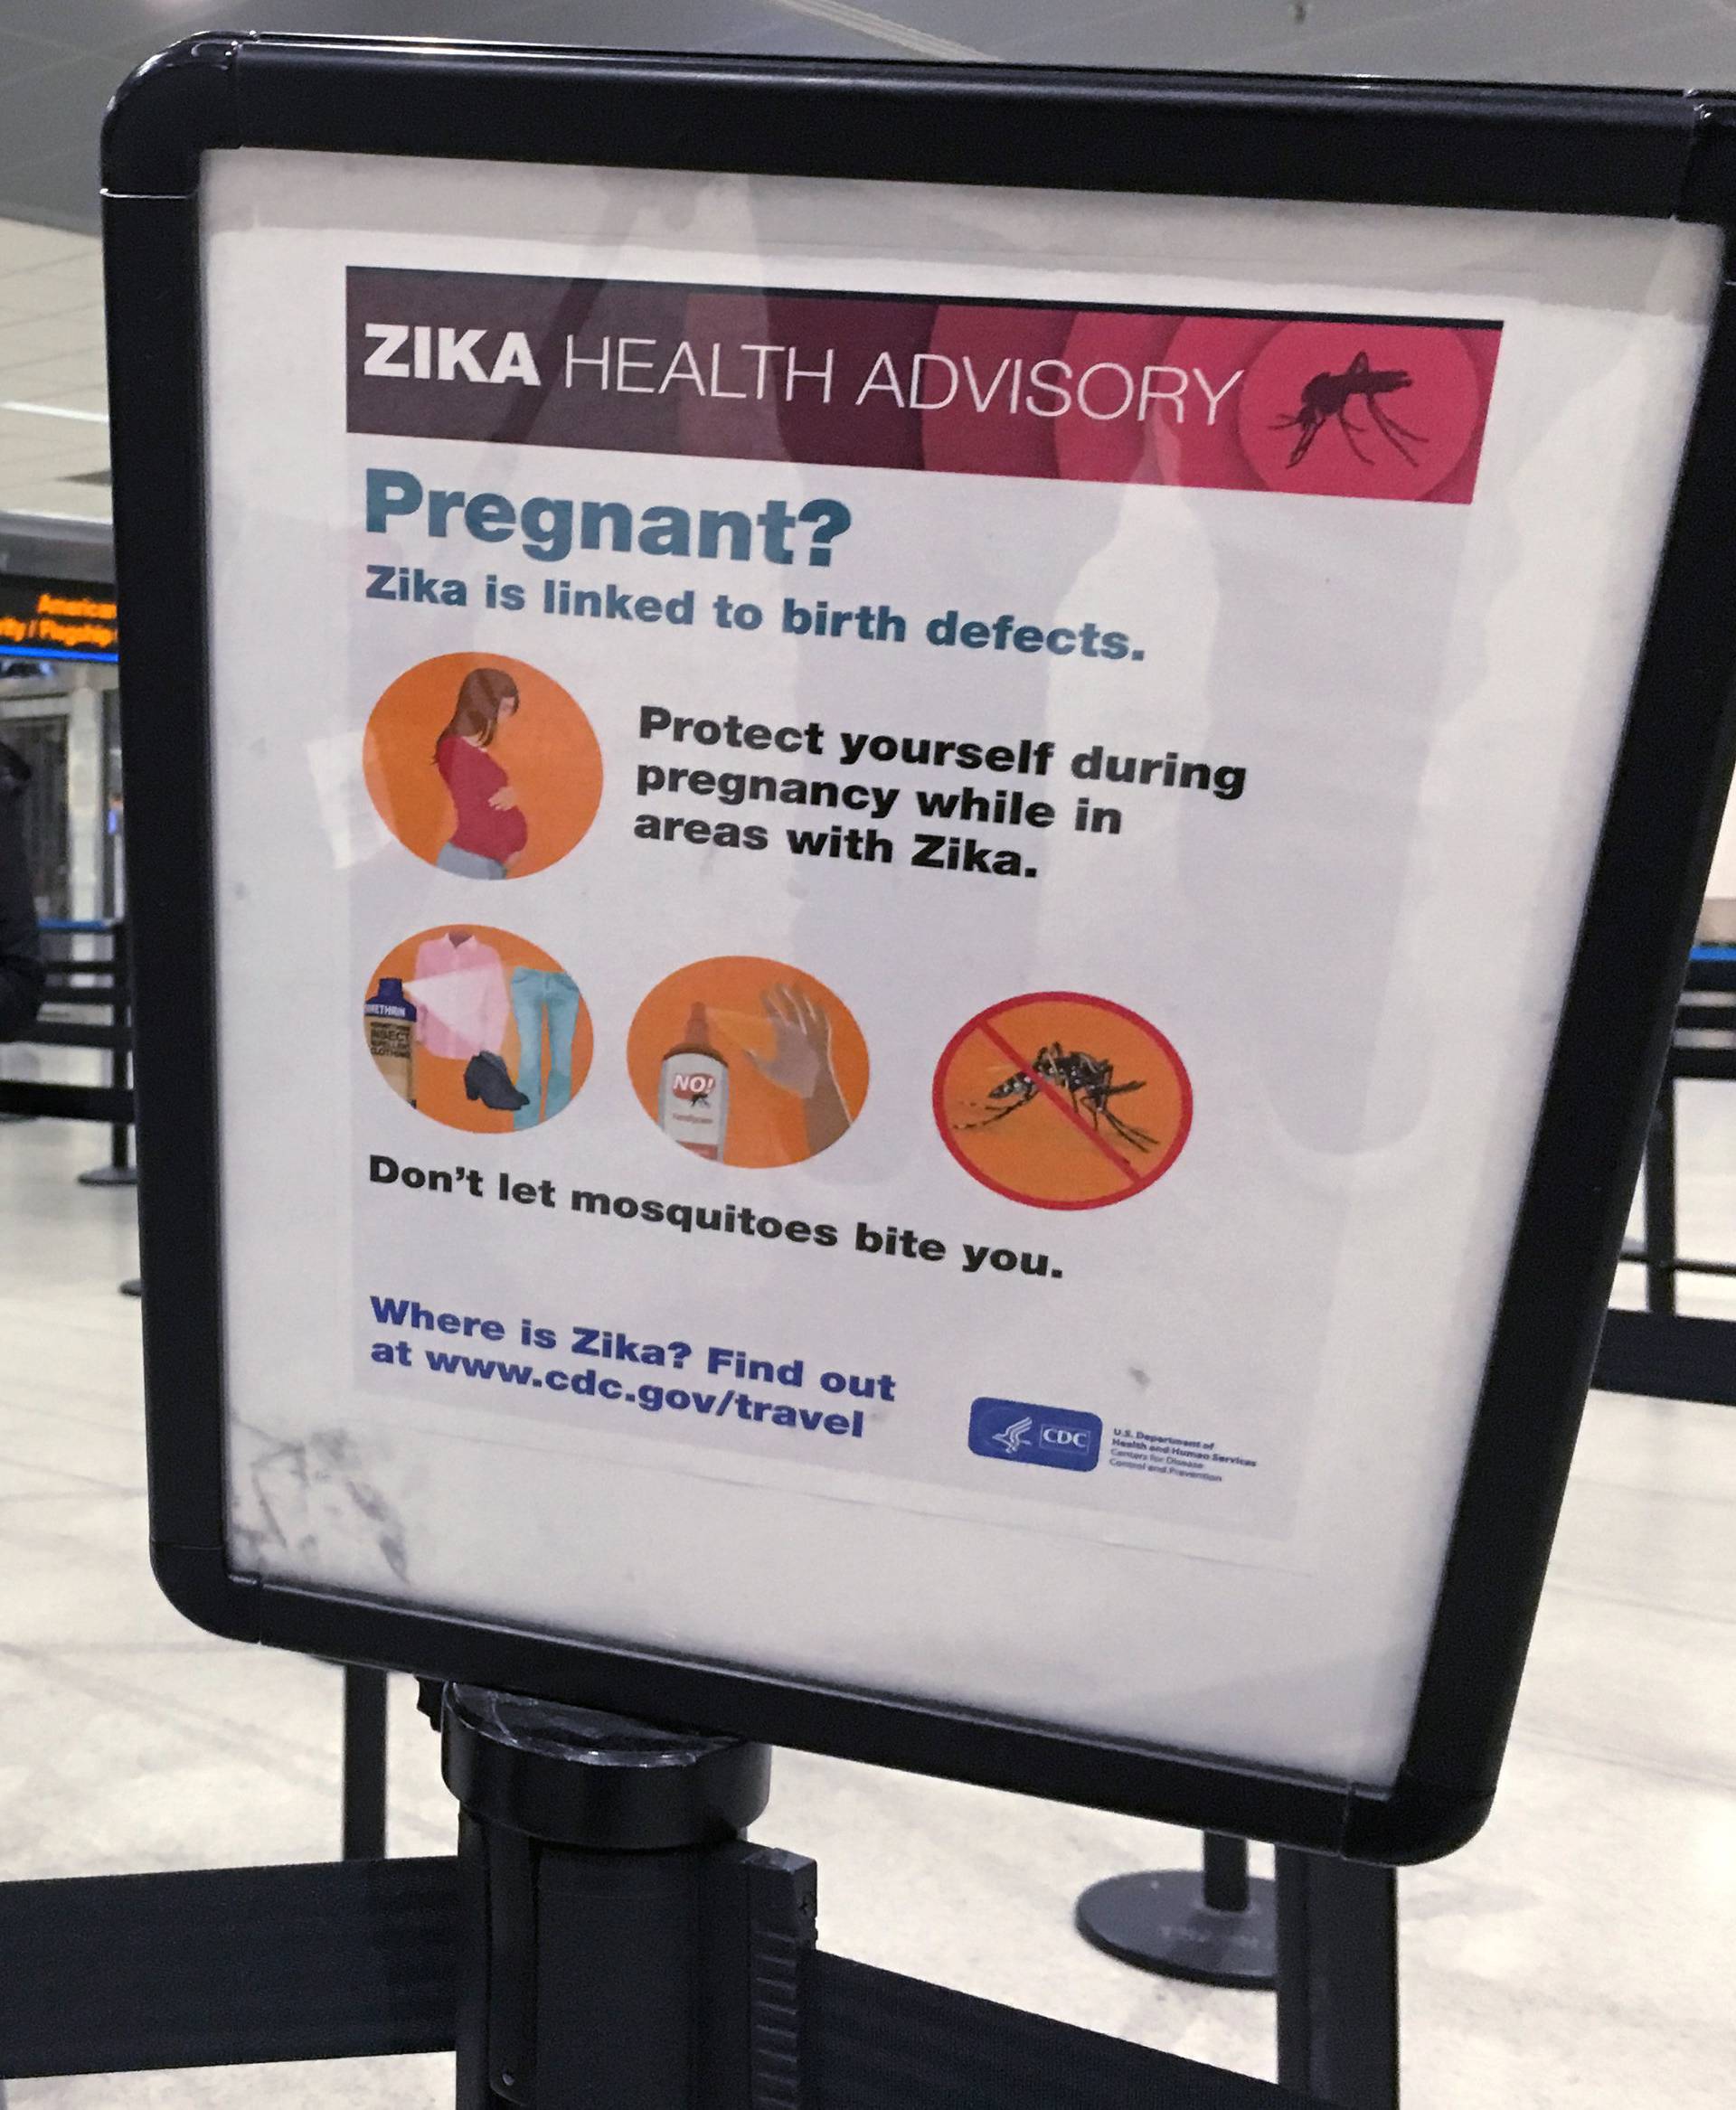 A woman looks at a Center for Disease Control (CDC) health advisory sign about the dangers of the Zika virus as she lines up for a security screening at Miami International Airport in Miami